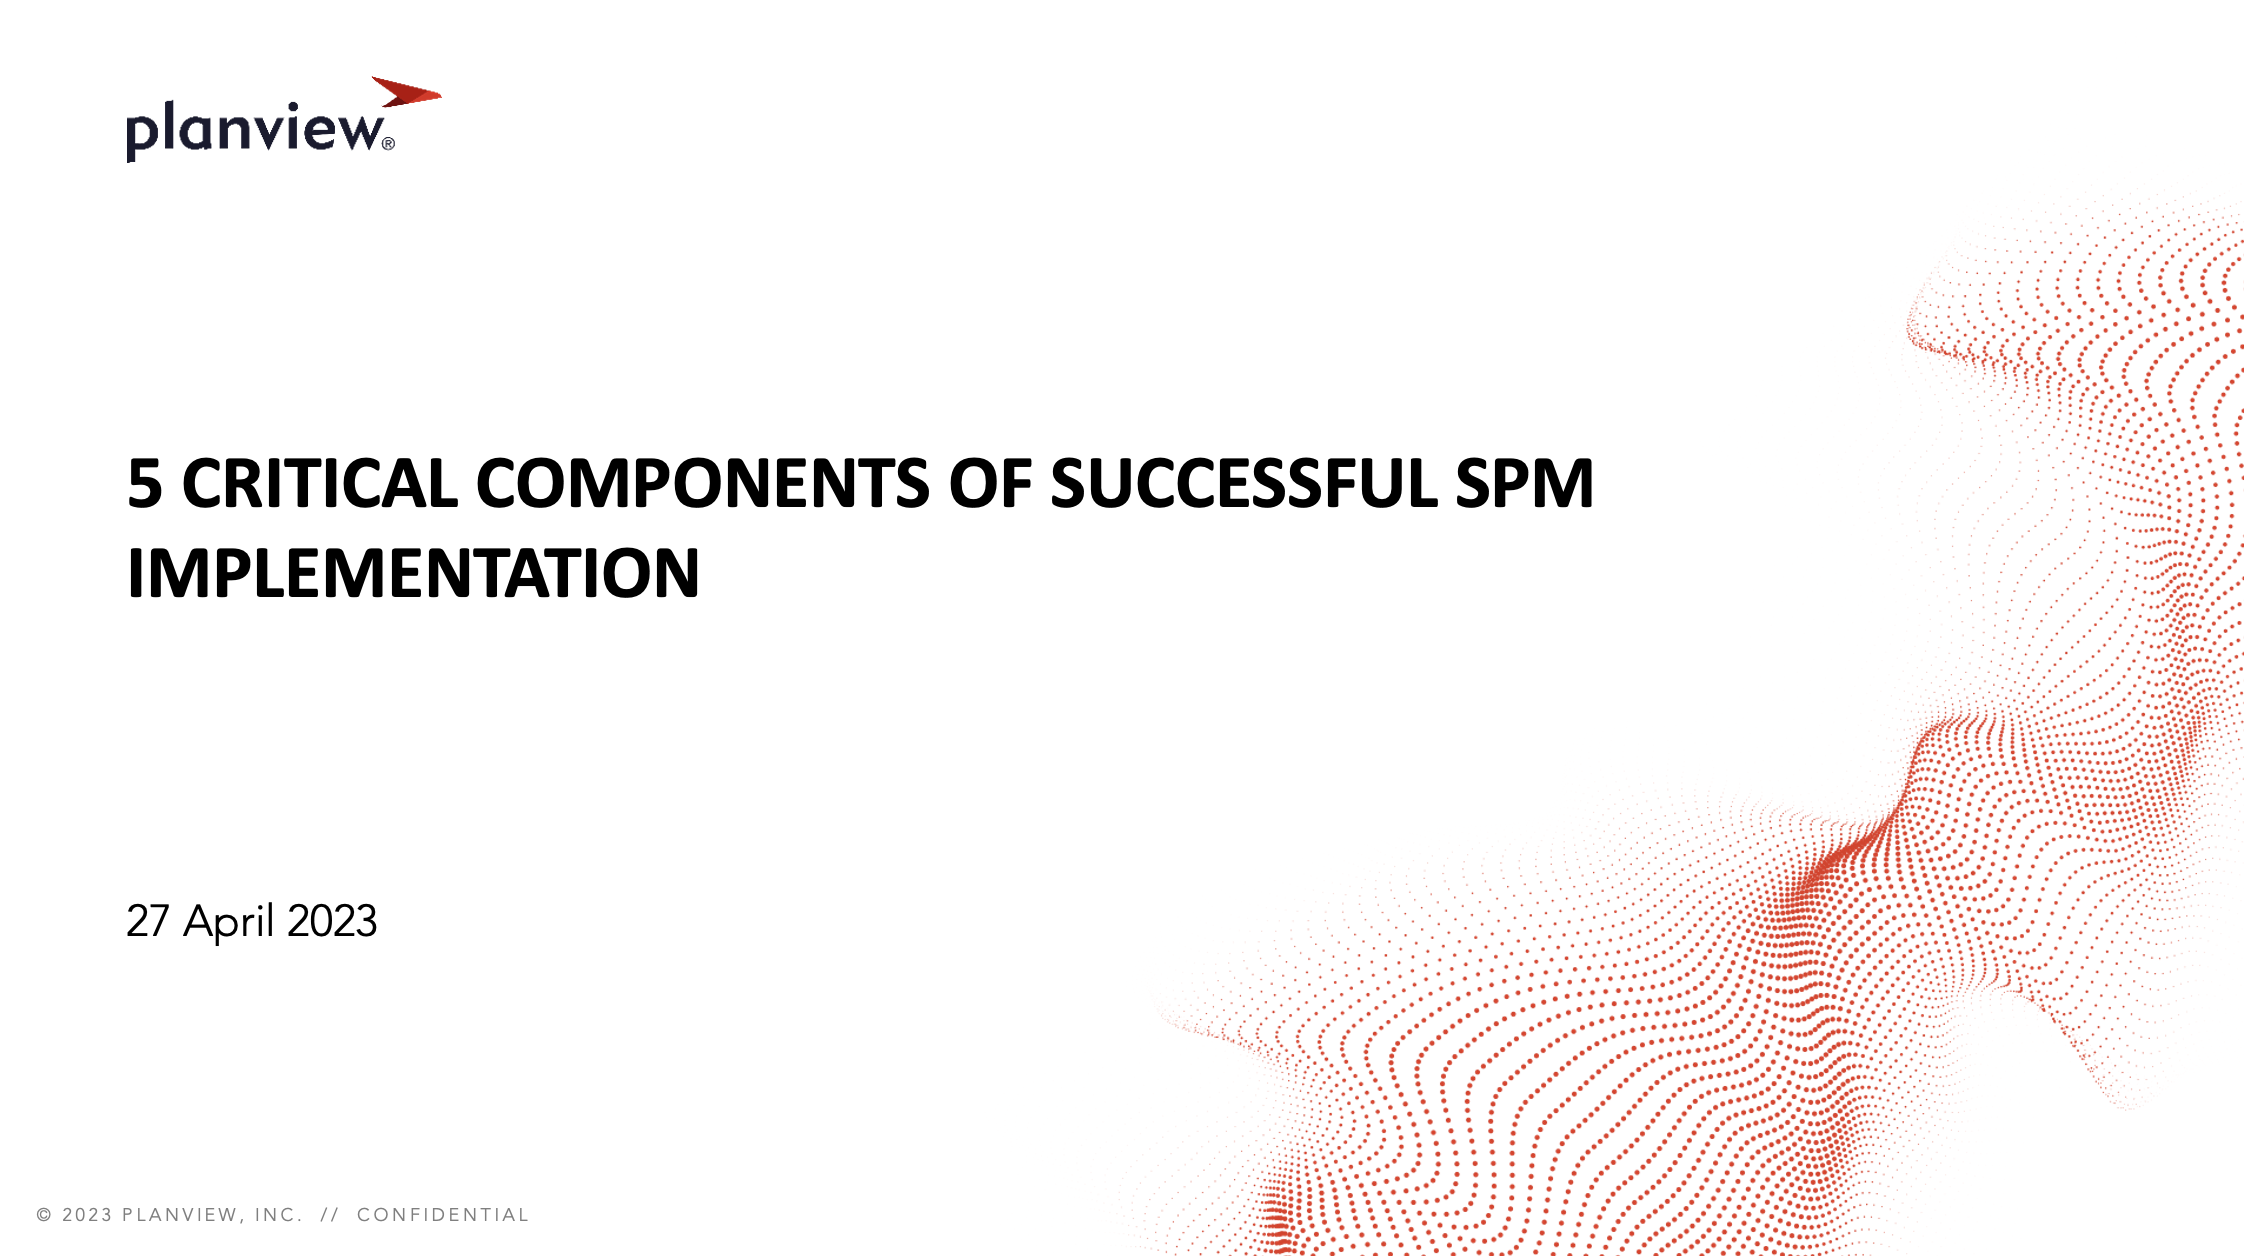 5 Critical Components of Successful SPM Implementation